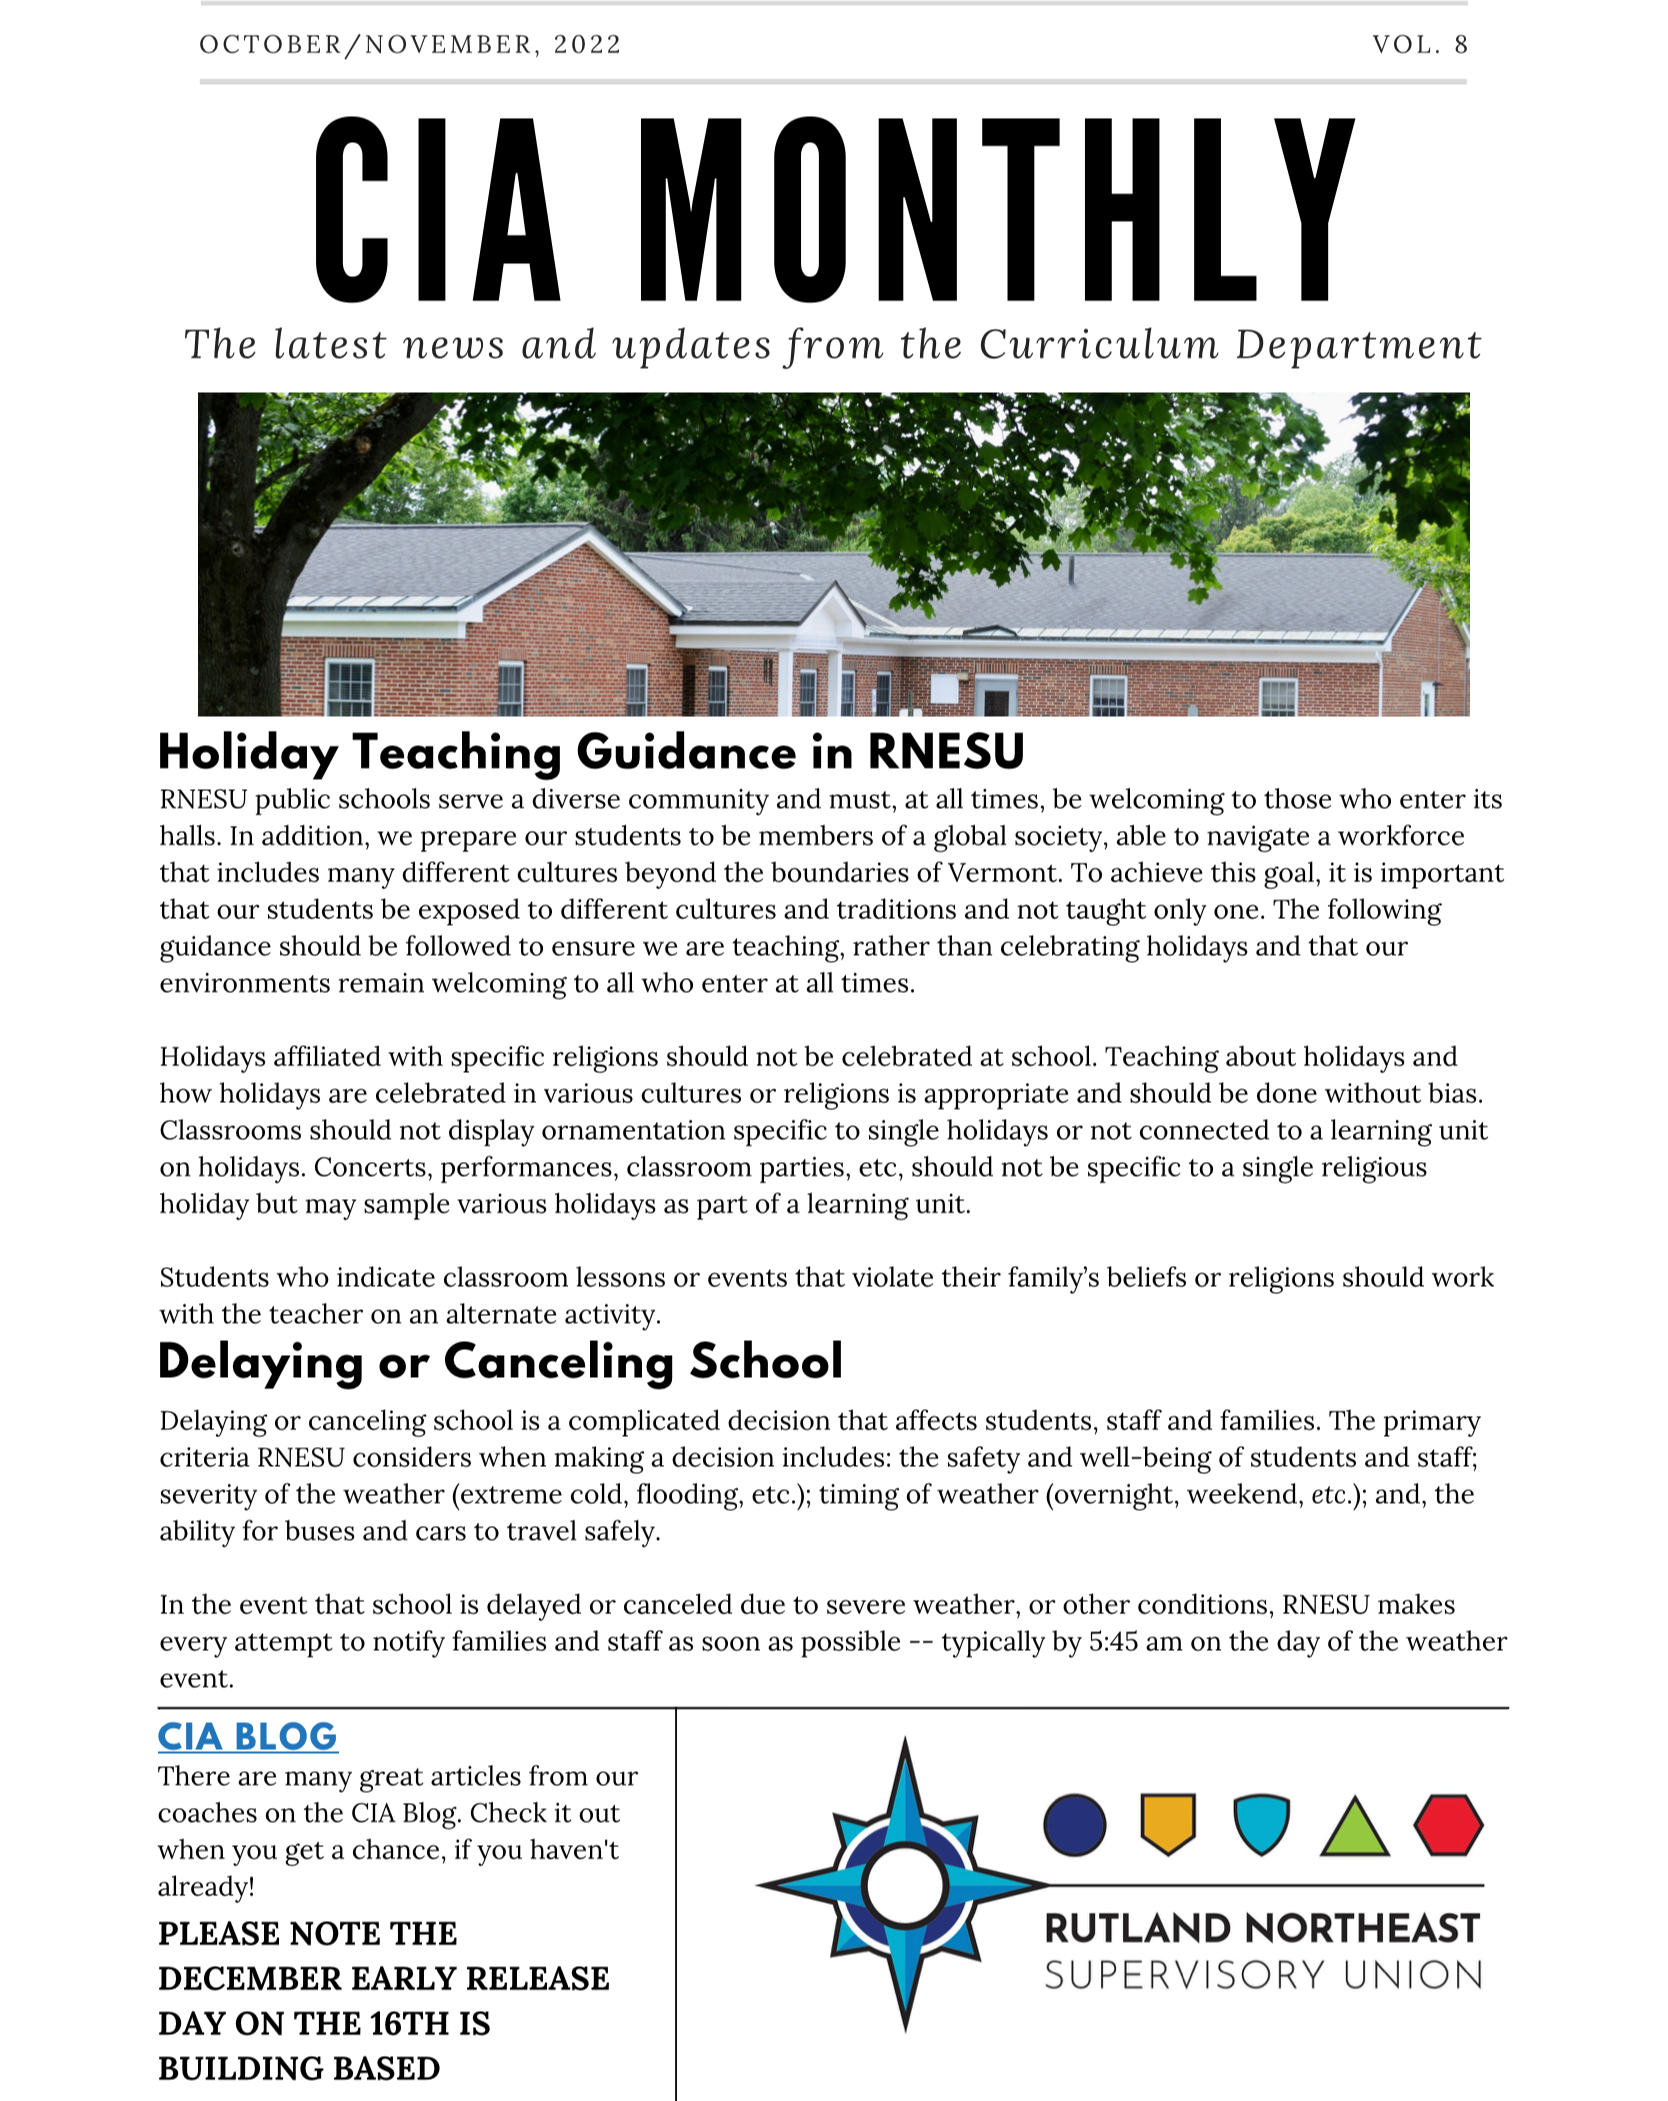 CIA October/November 2022 Monthly